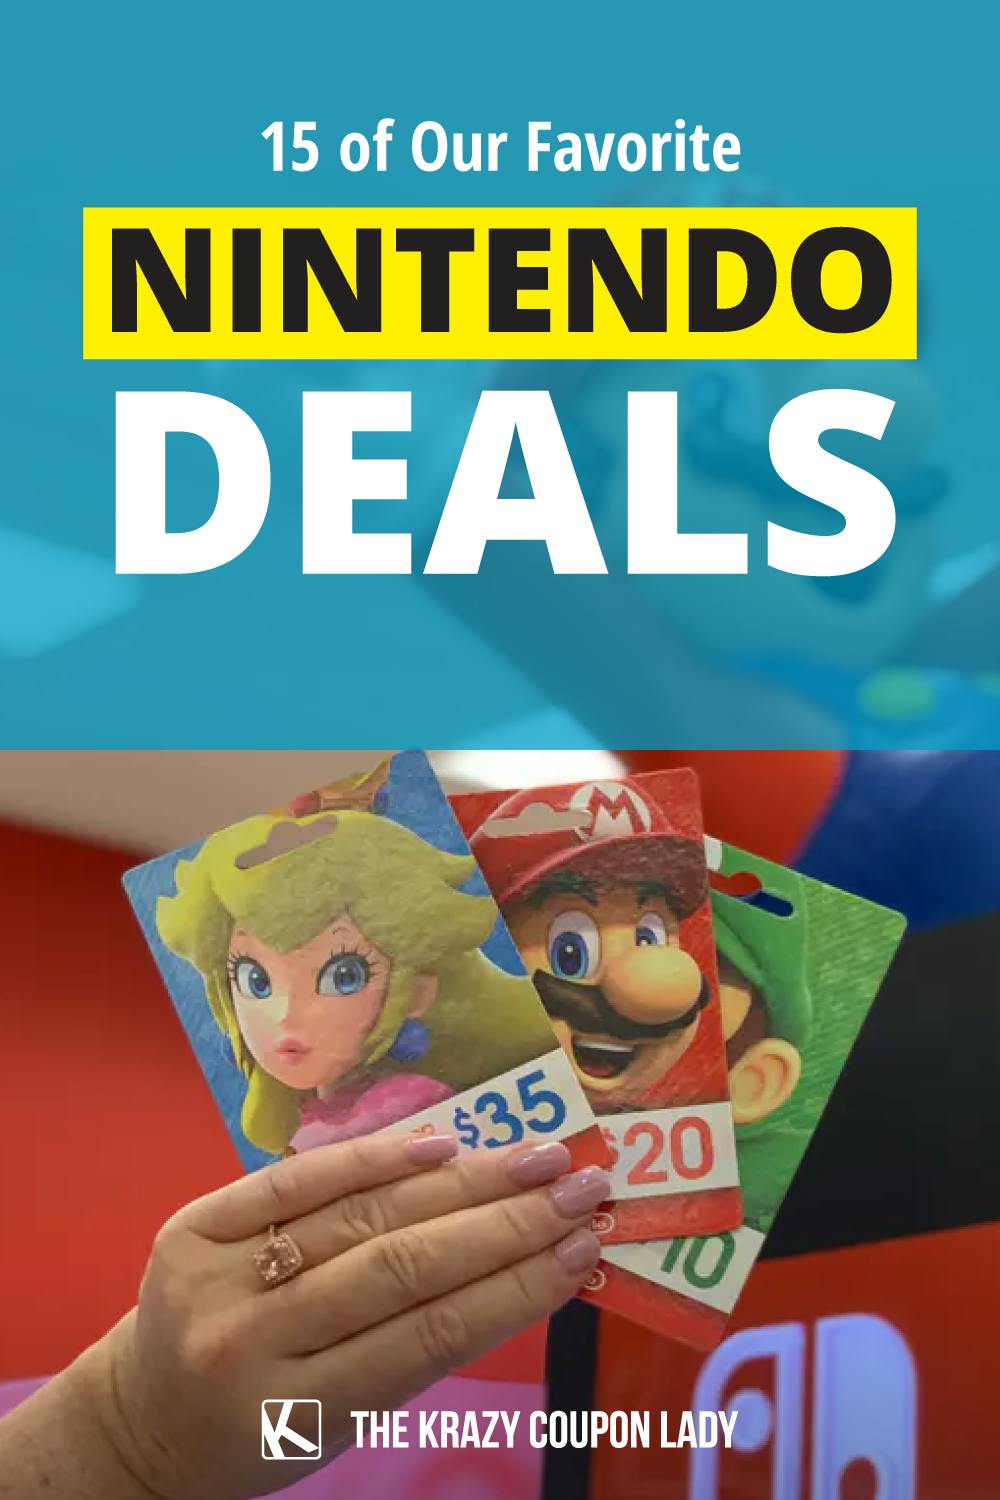 15 of Our Favorite Nintendo Deals Your Family Will Love